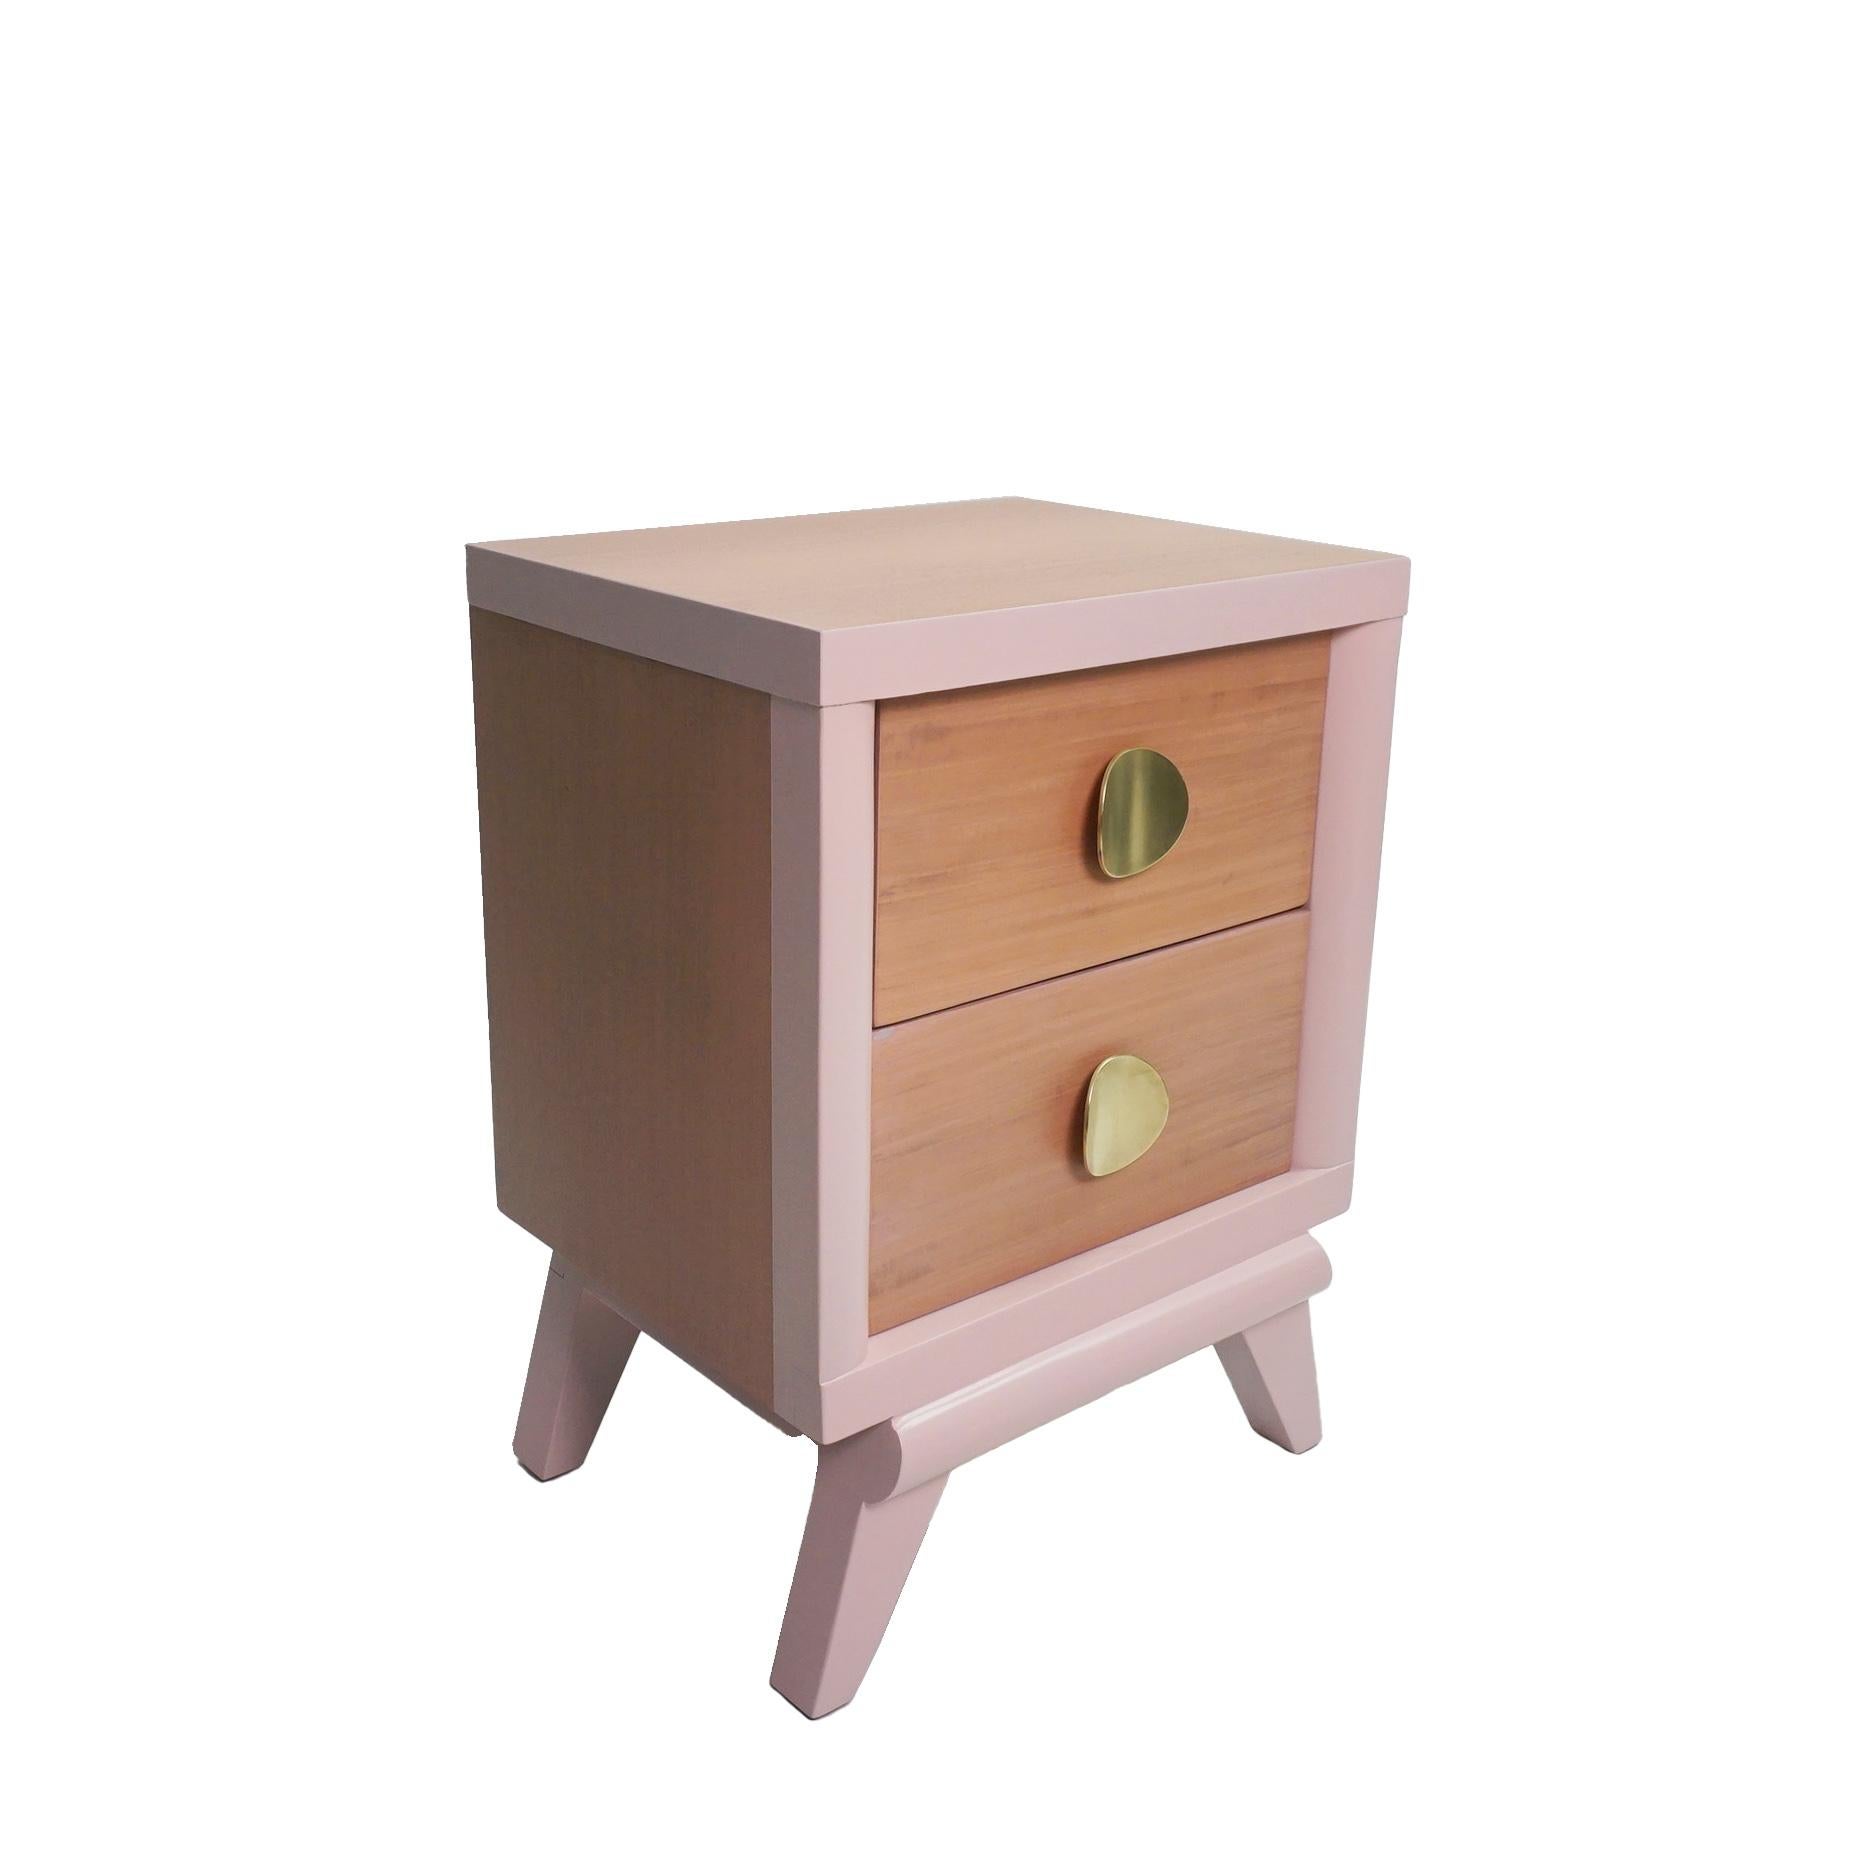 Offering a pair of expertly restored 1950’s American 2-drawer end tables. This petite and charming pair have been crafted from mahogany, with its painted frame and drawer face stained in dusty blush pink to boast a lovely wood grain. All drawers